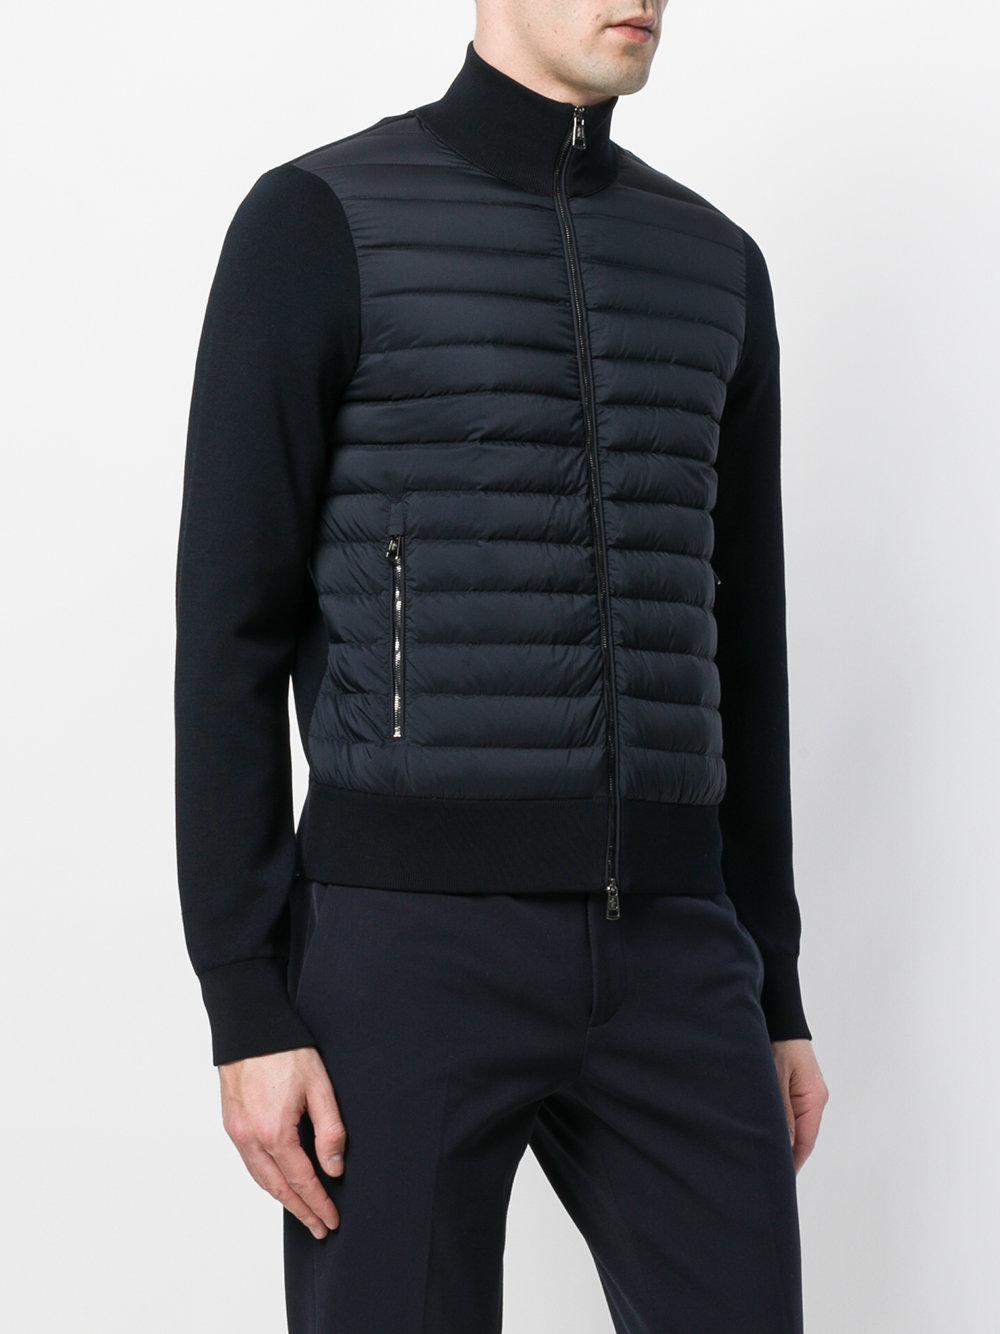 Moncler Synthetic Padded Front Cardigan in Black for Men - Lyst